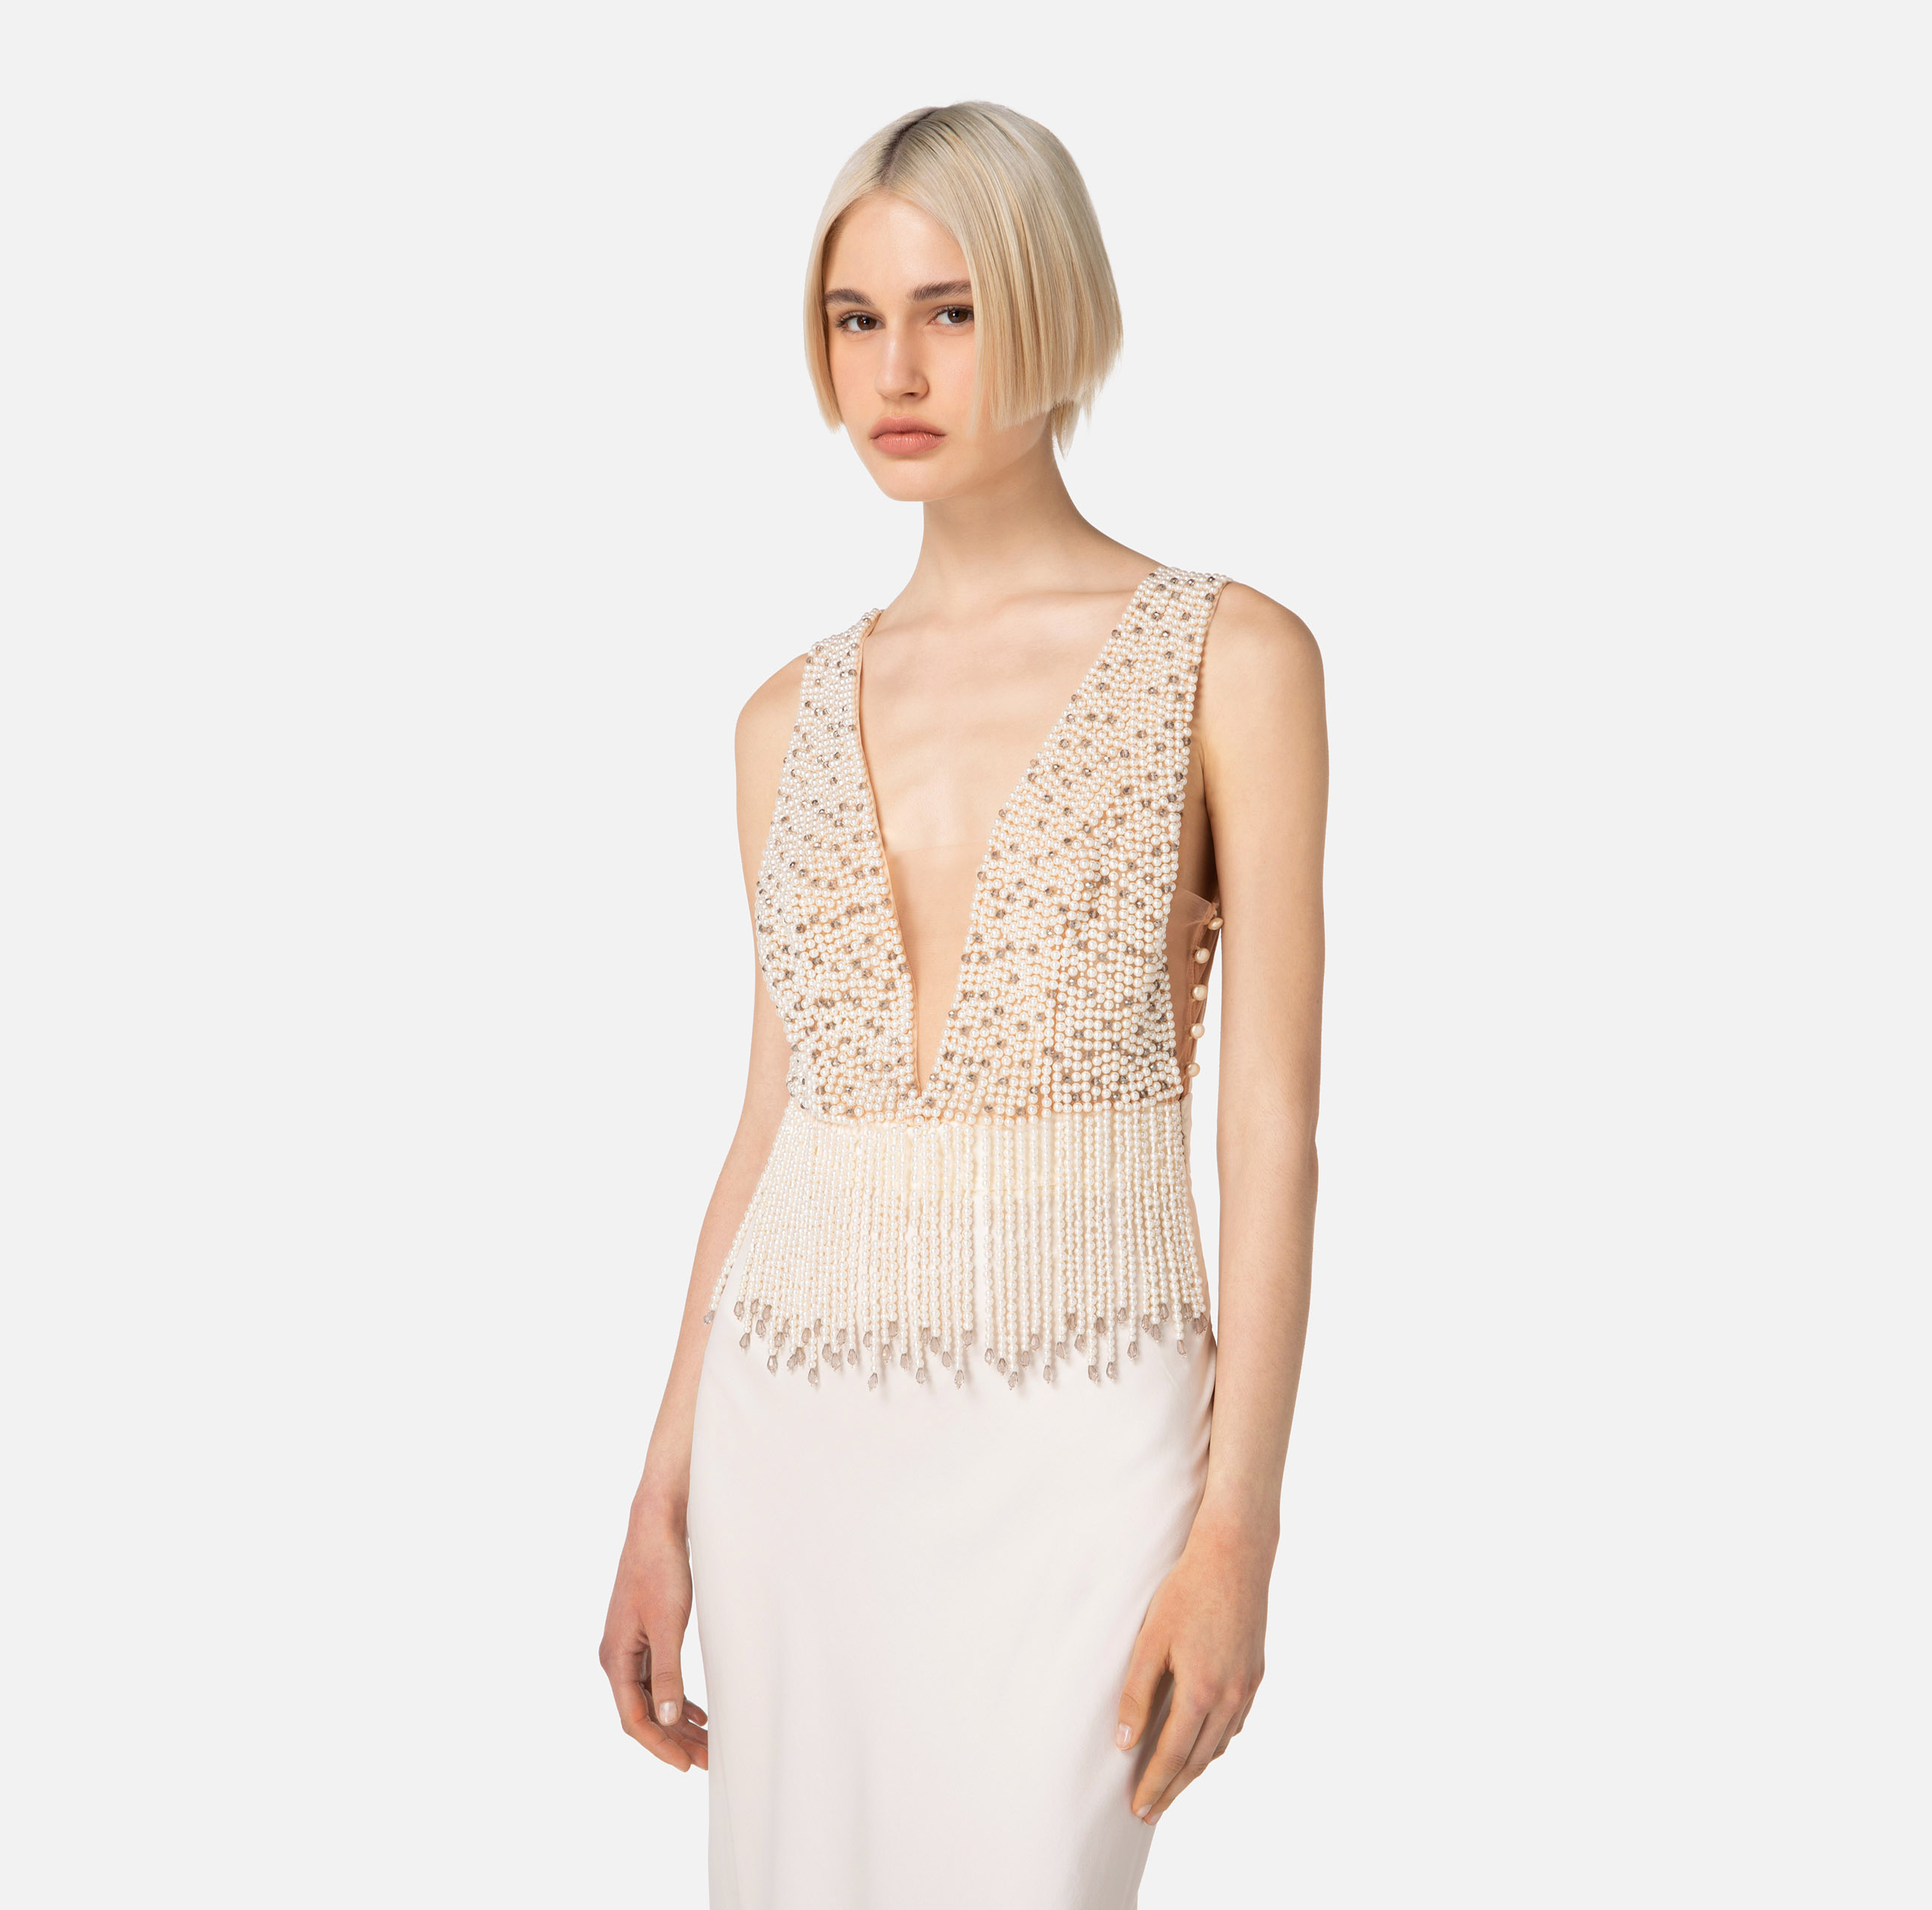 Red Carpet silk dress with embroidered bodice - Elisabetta Franchi